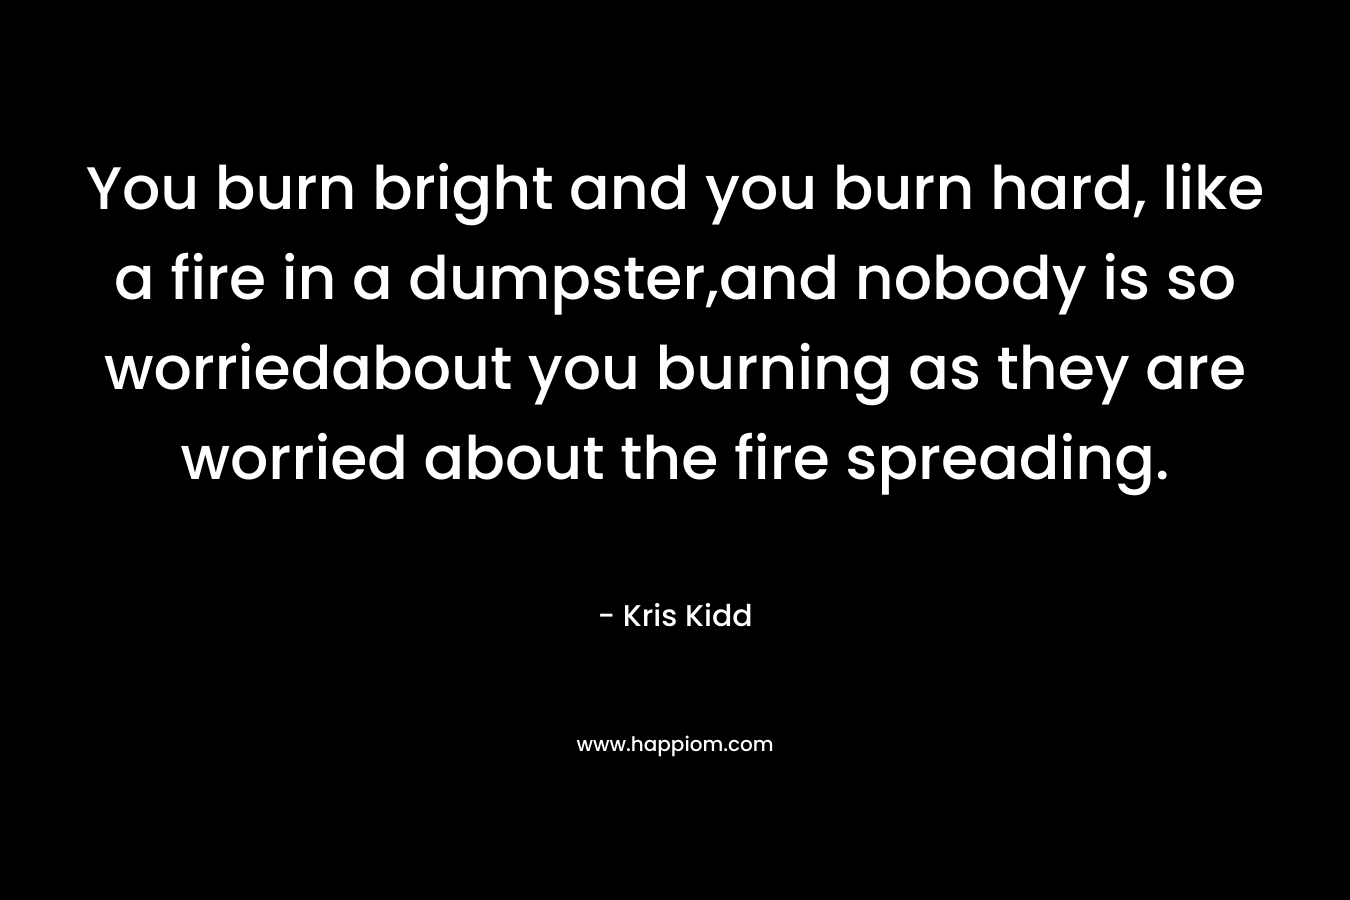 You burn bright and you burn hard, like a fire in a dumpster,and nobody is so worriedabout you burning as they are worried about the fire spreading.